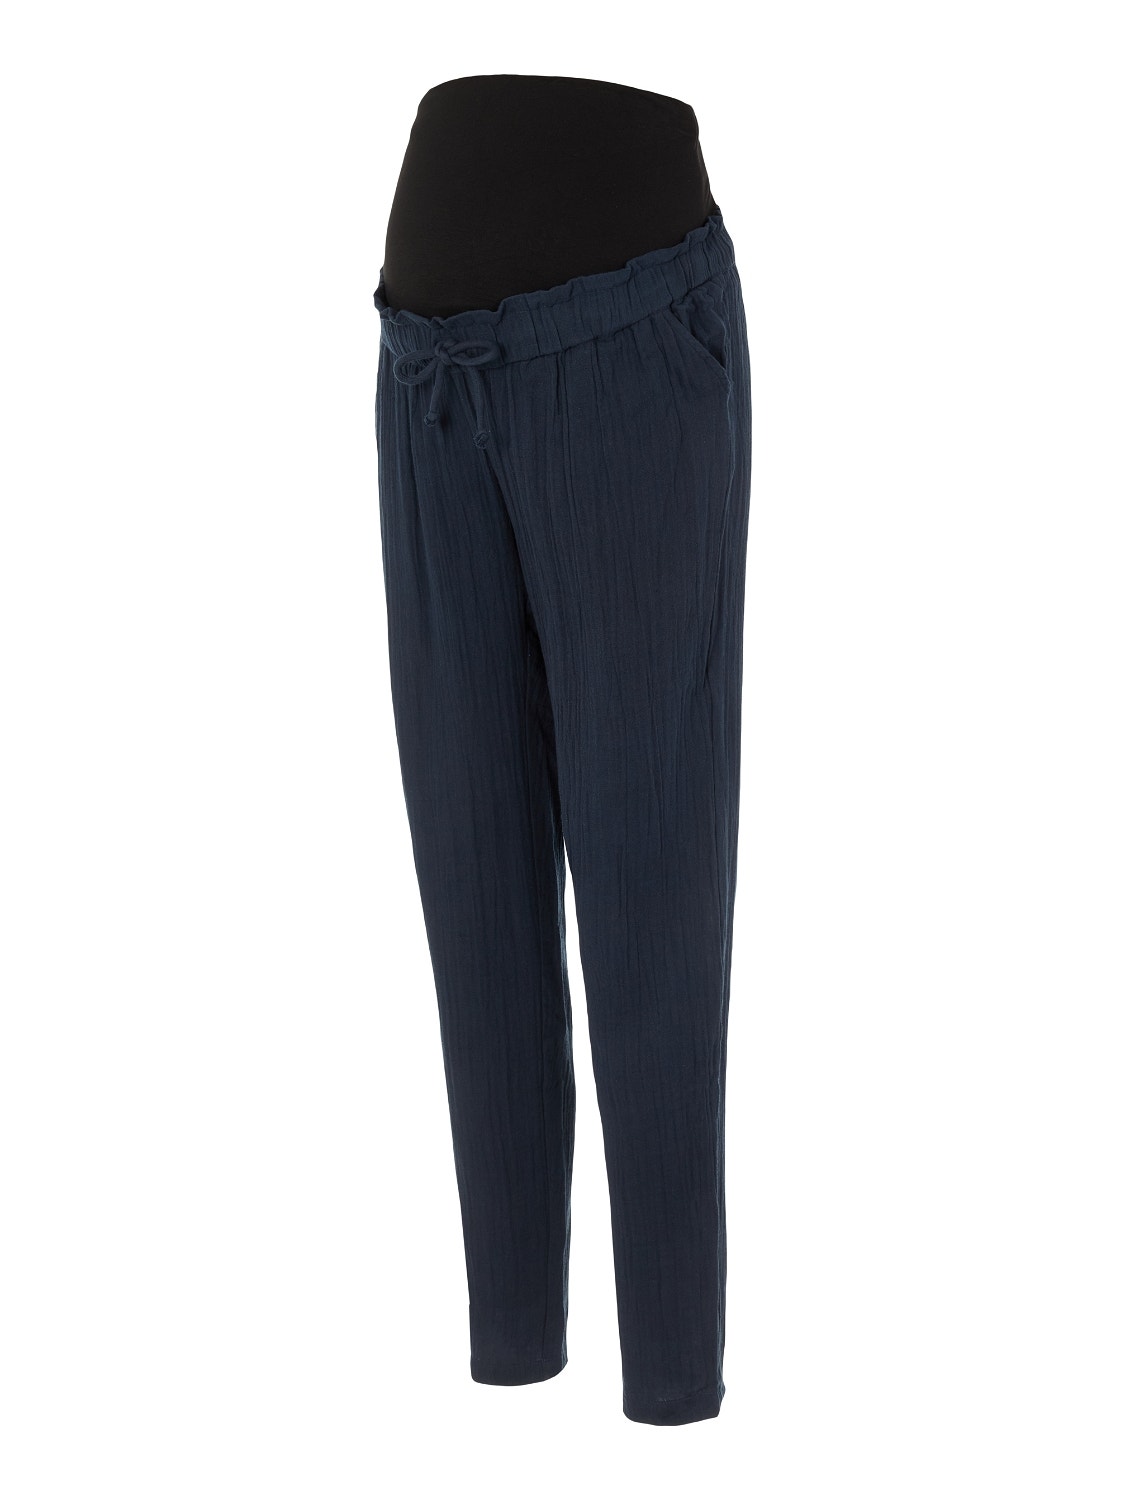 MAMA.LICIOUS Maternity-trousers -Blueberry - 20016468